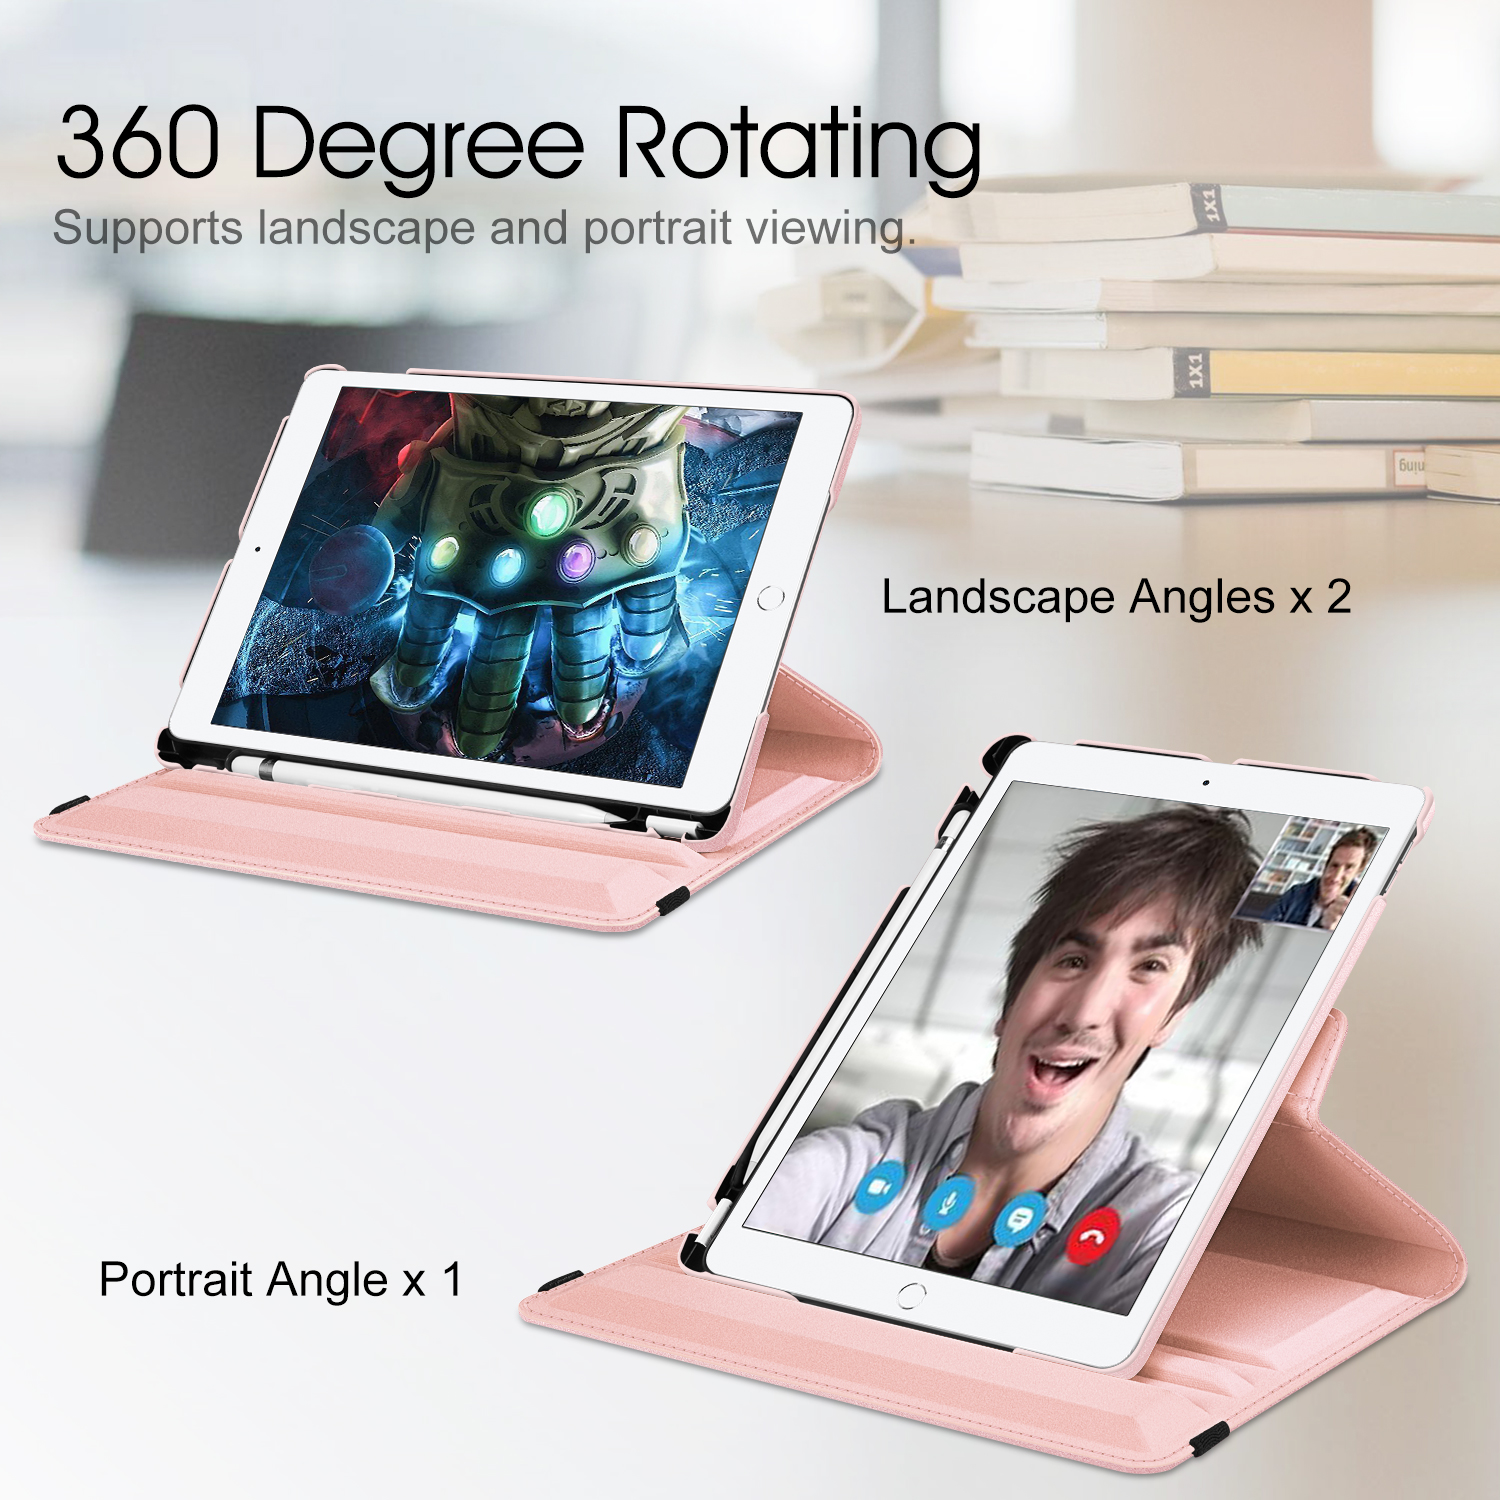 2019), Roségold Bookcover, Apple, iPad (8. und 7 FINTIE / Hülle, Zoll Generation, Modell 10.2 2020